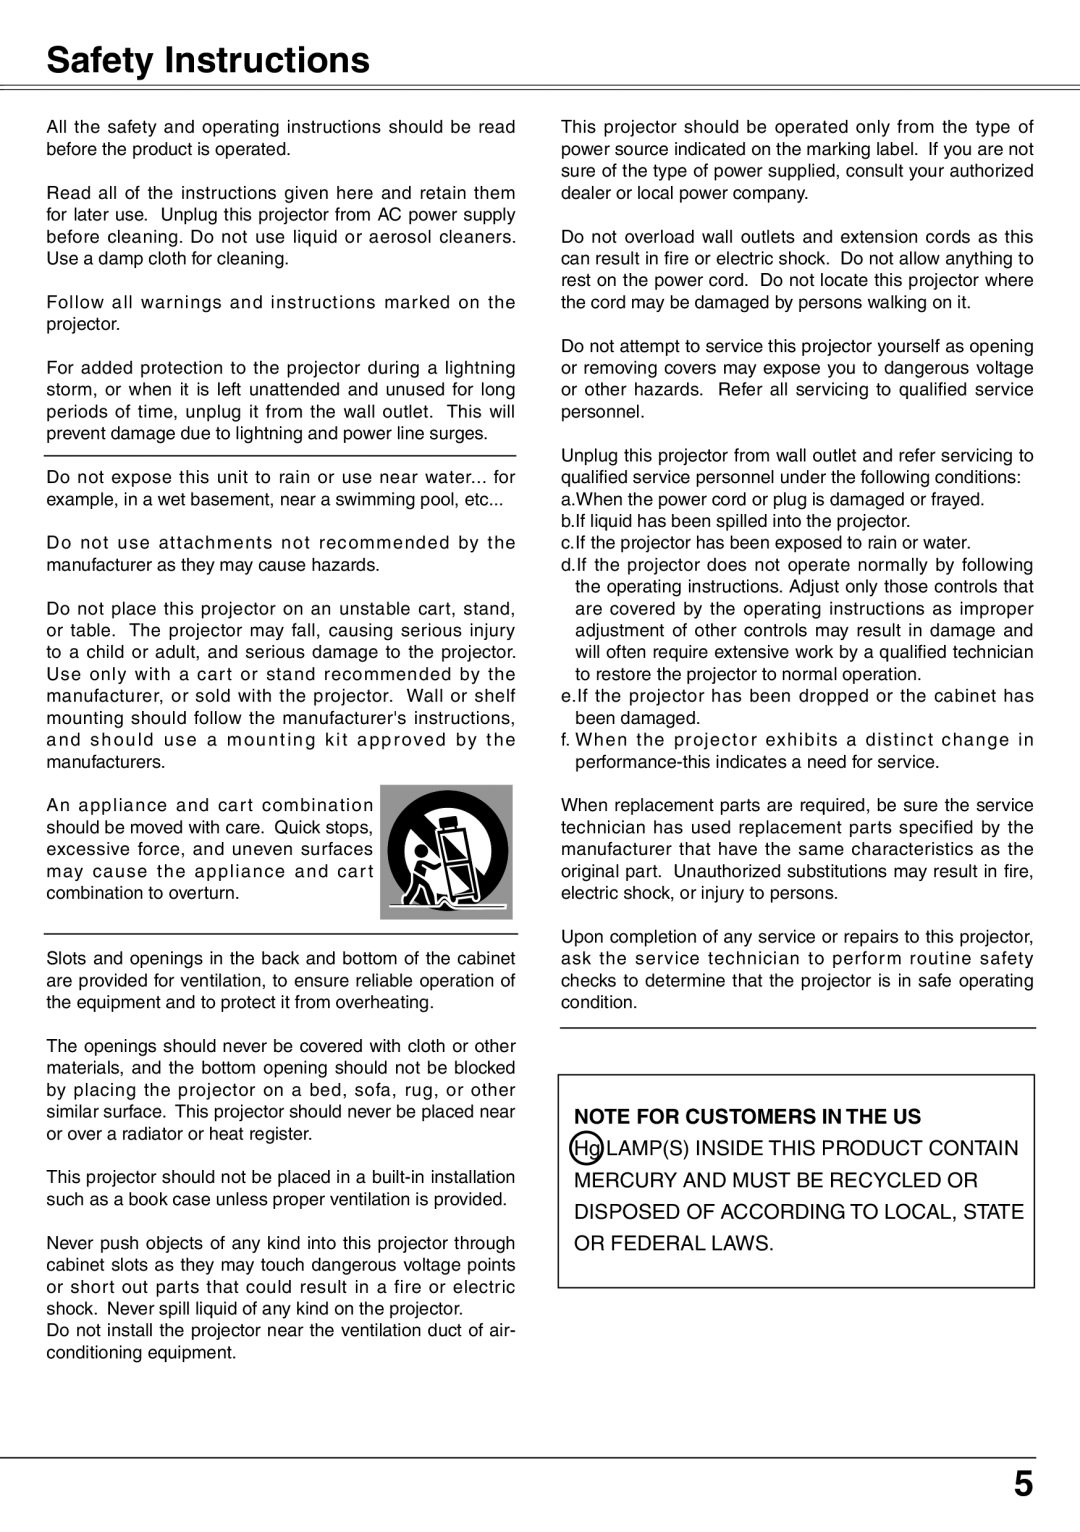 Eiki LC-XD25 owner manual Safety Instructions, Note For Customers In The Us 